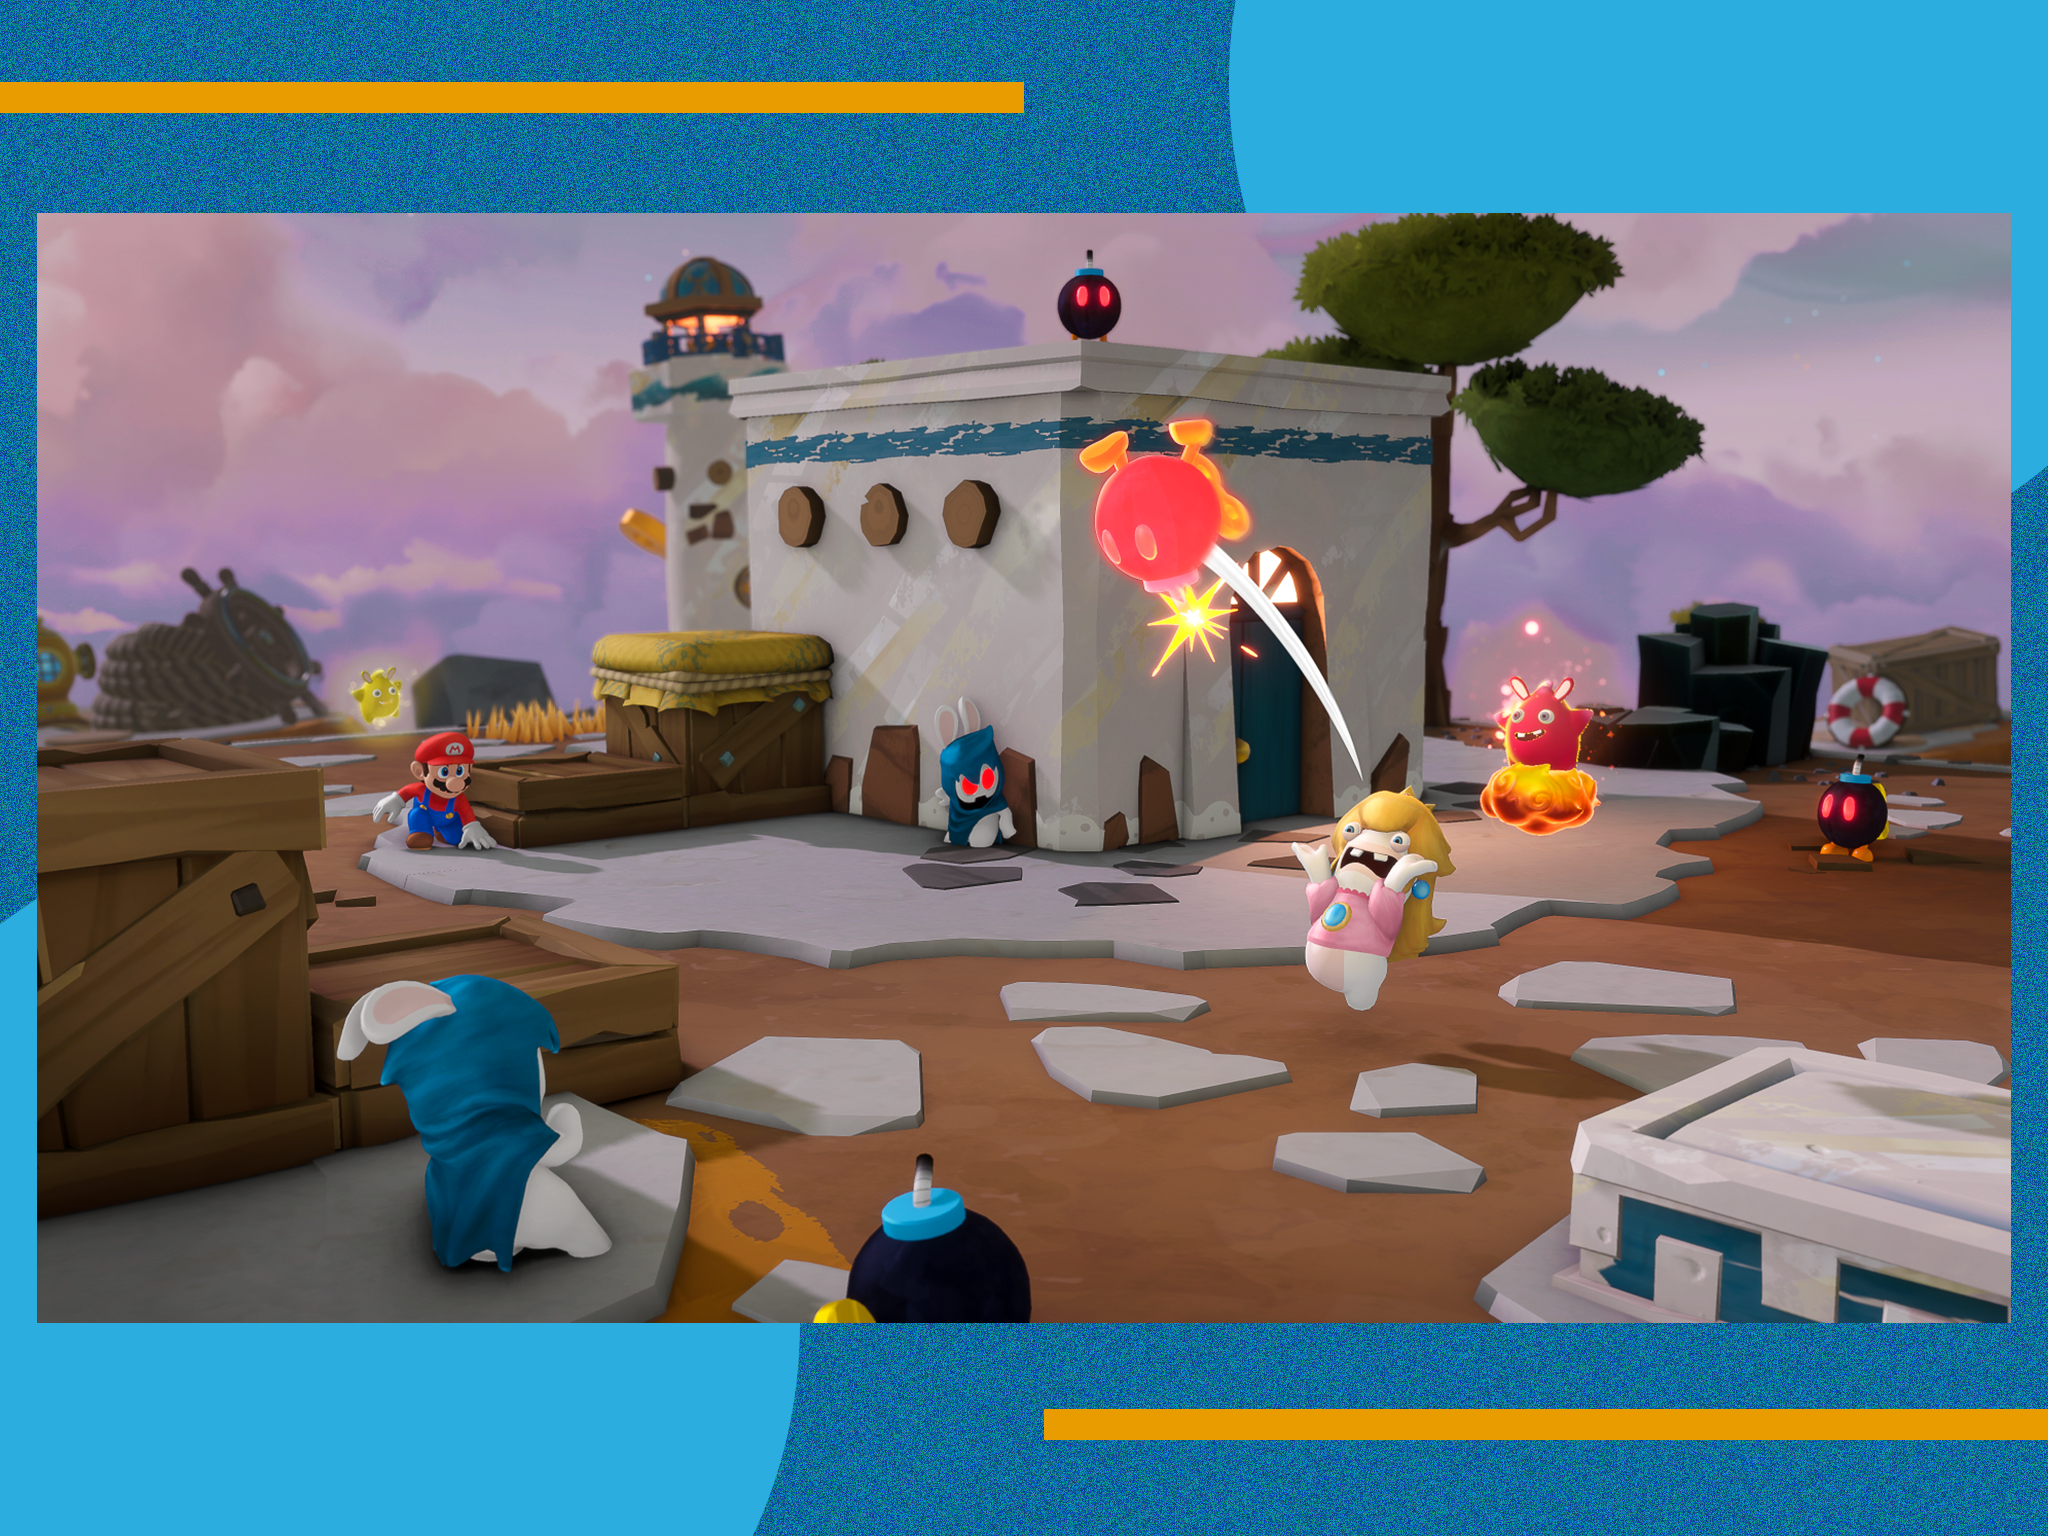 Mario + Rabbids Sparks of Hope hands-on preview: Tactical mayhem with some tricks up its sleeve